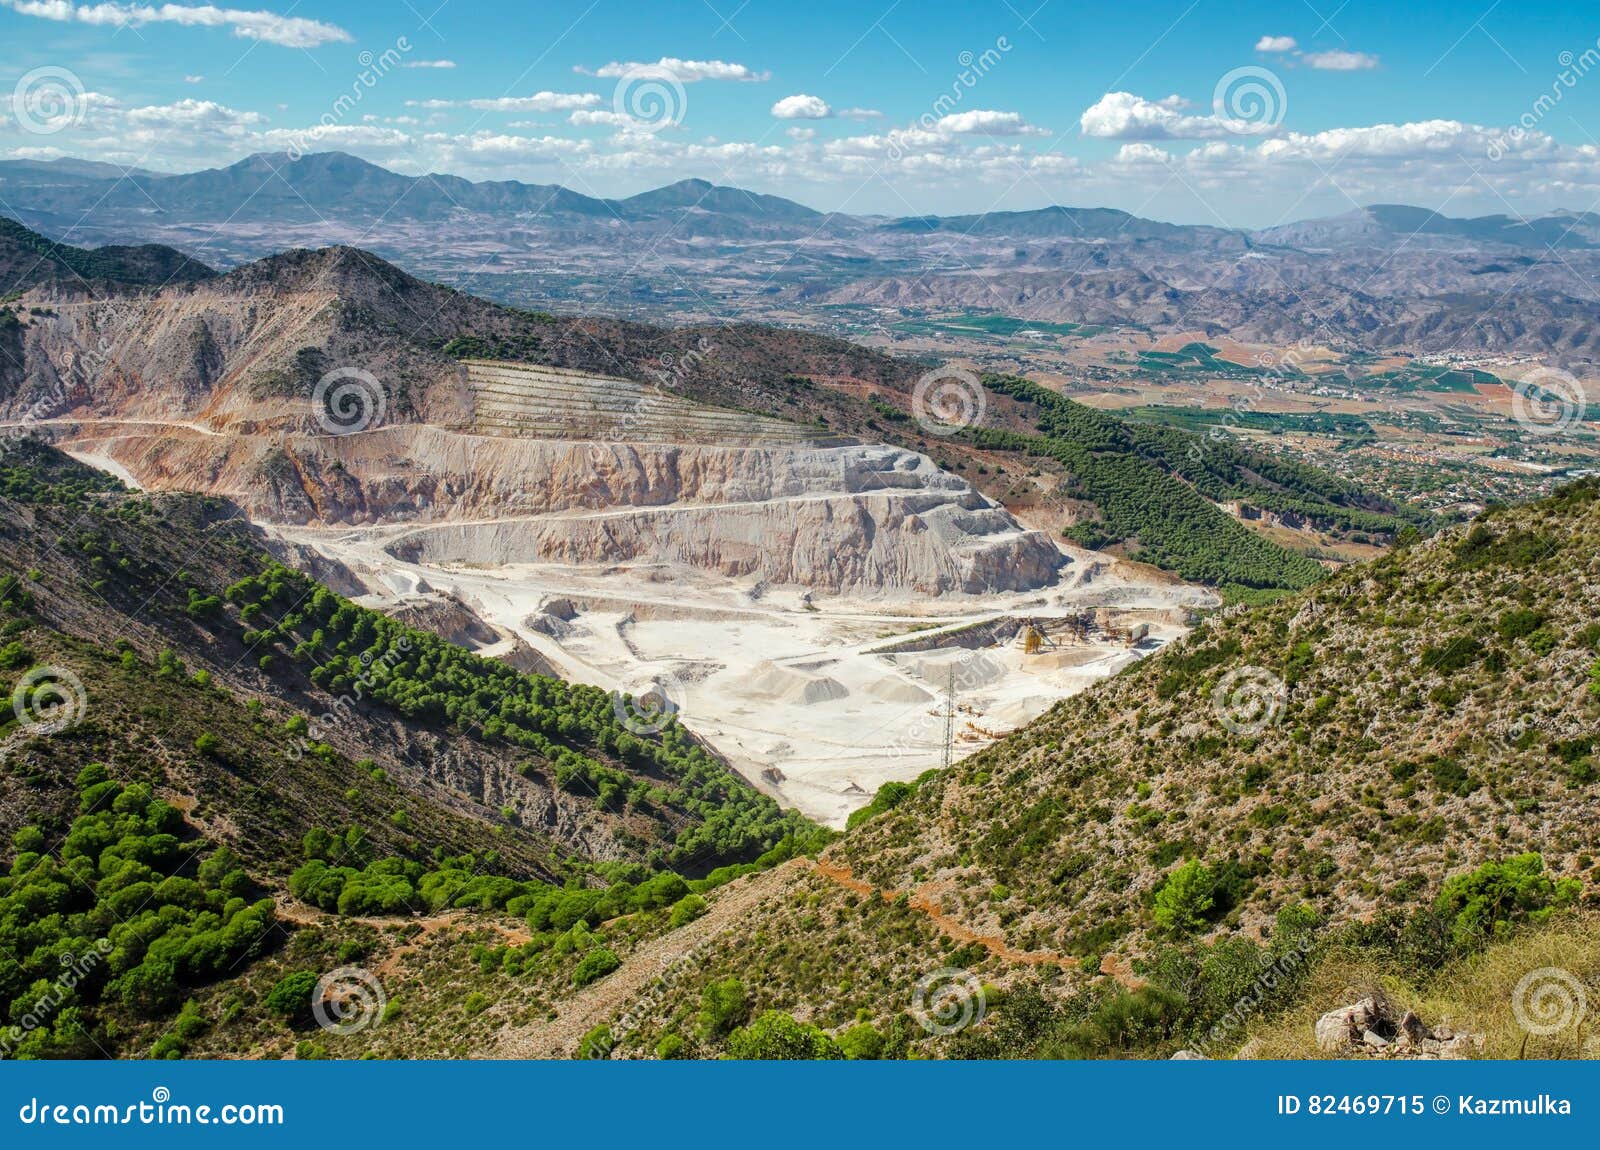 overall view of limestone quarry near calamorro mountain and benalmadena town, andalusia, southern spain.